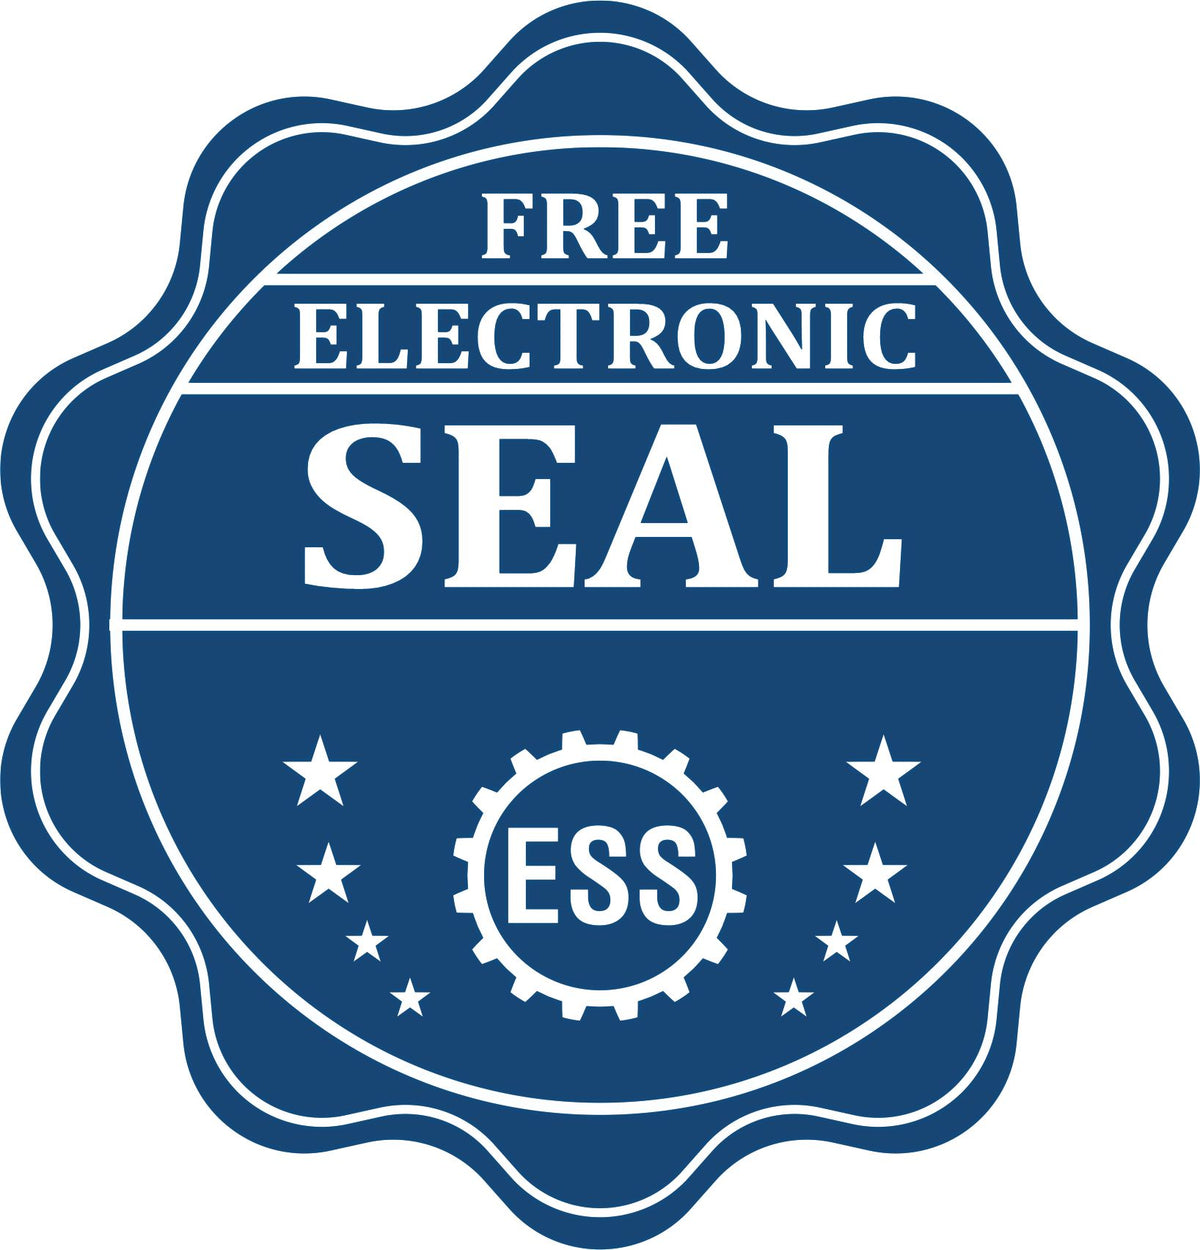 A badge showing a free electronic seal for the Georgia Desk Architect Embossing Seal with stars and the ESS gear on the emblem.